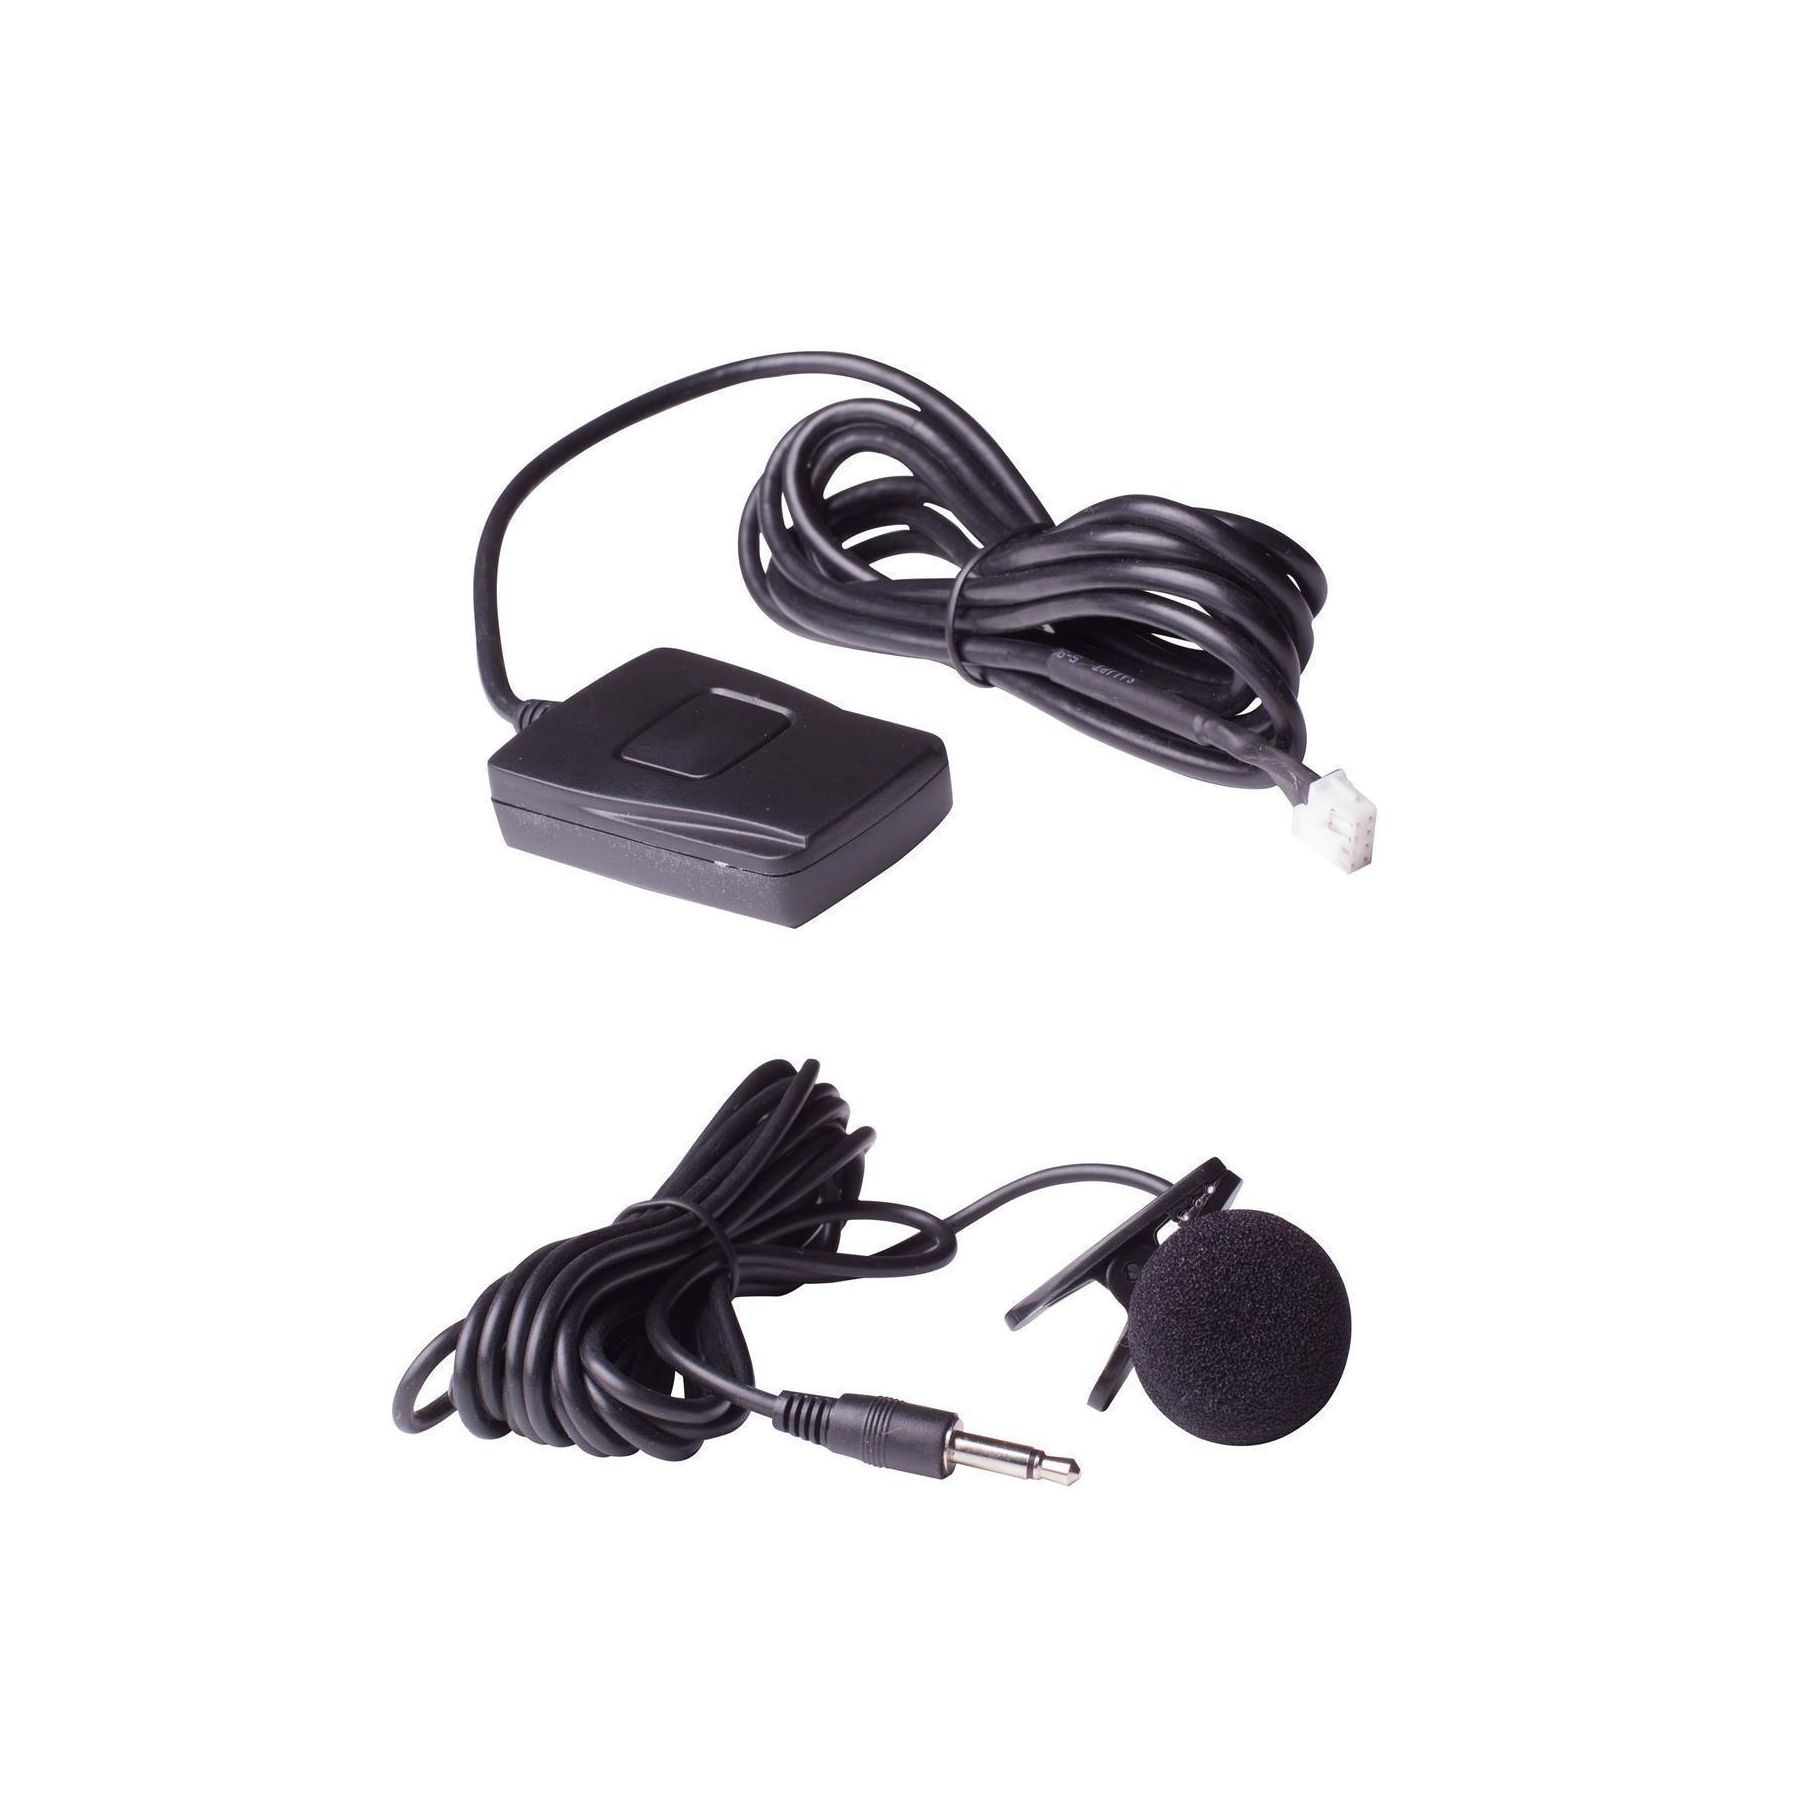 Digital iPod/iPhone Adapter Interface Kit w/Aux Cable for select Infiniti/Nissan